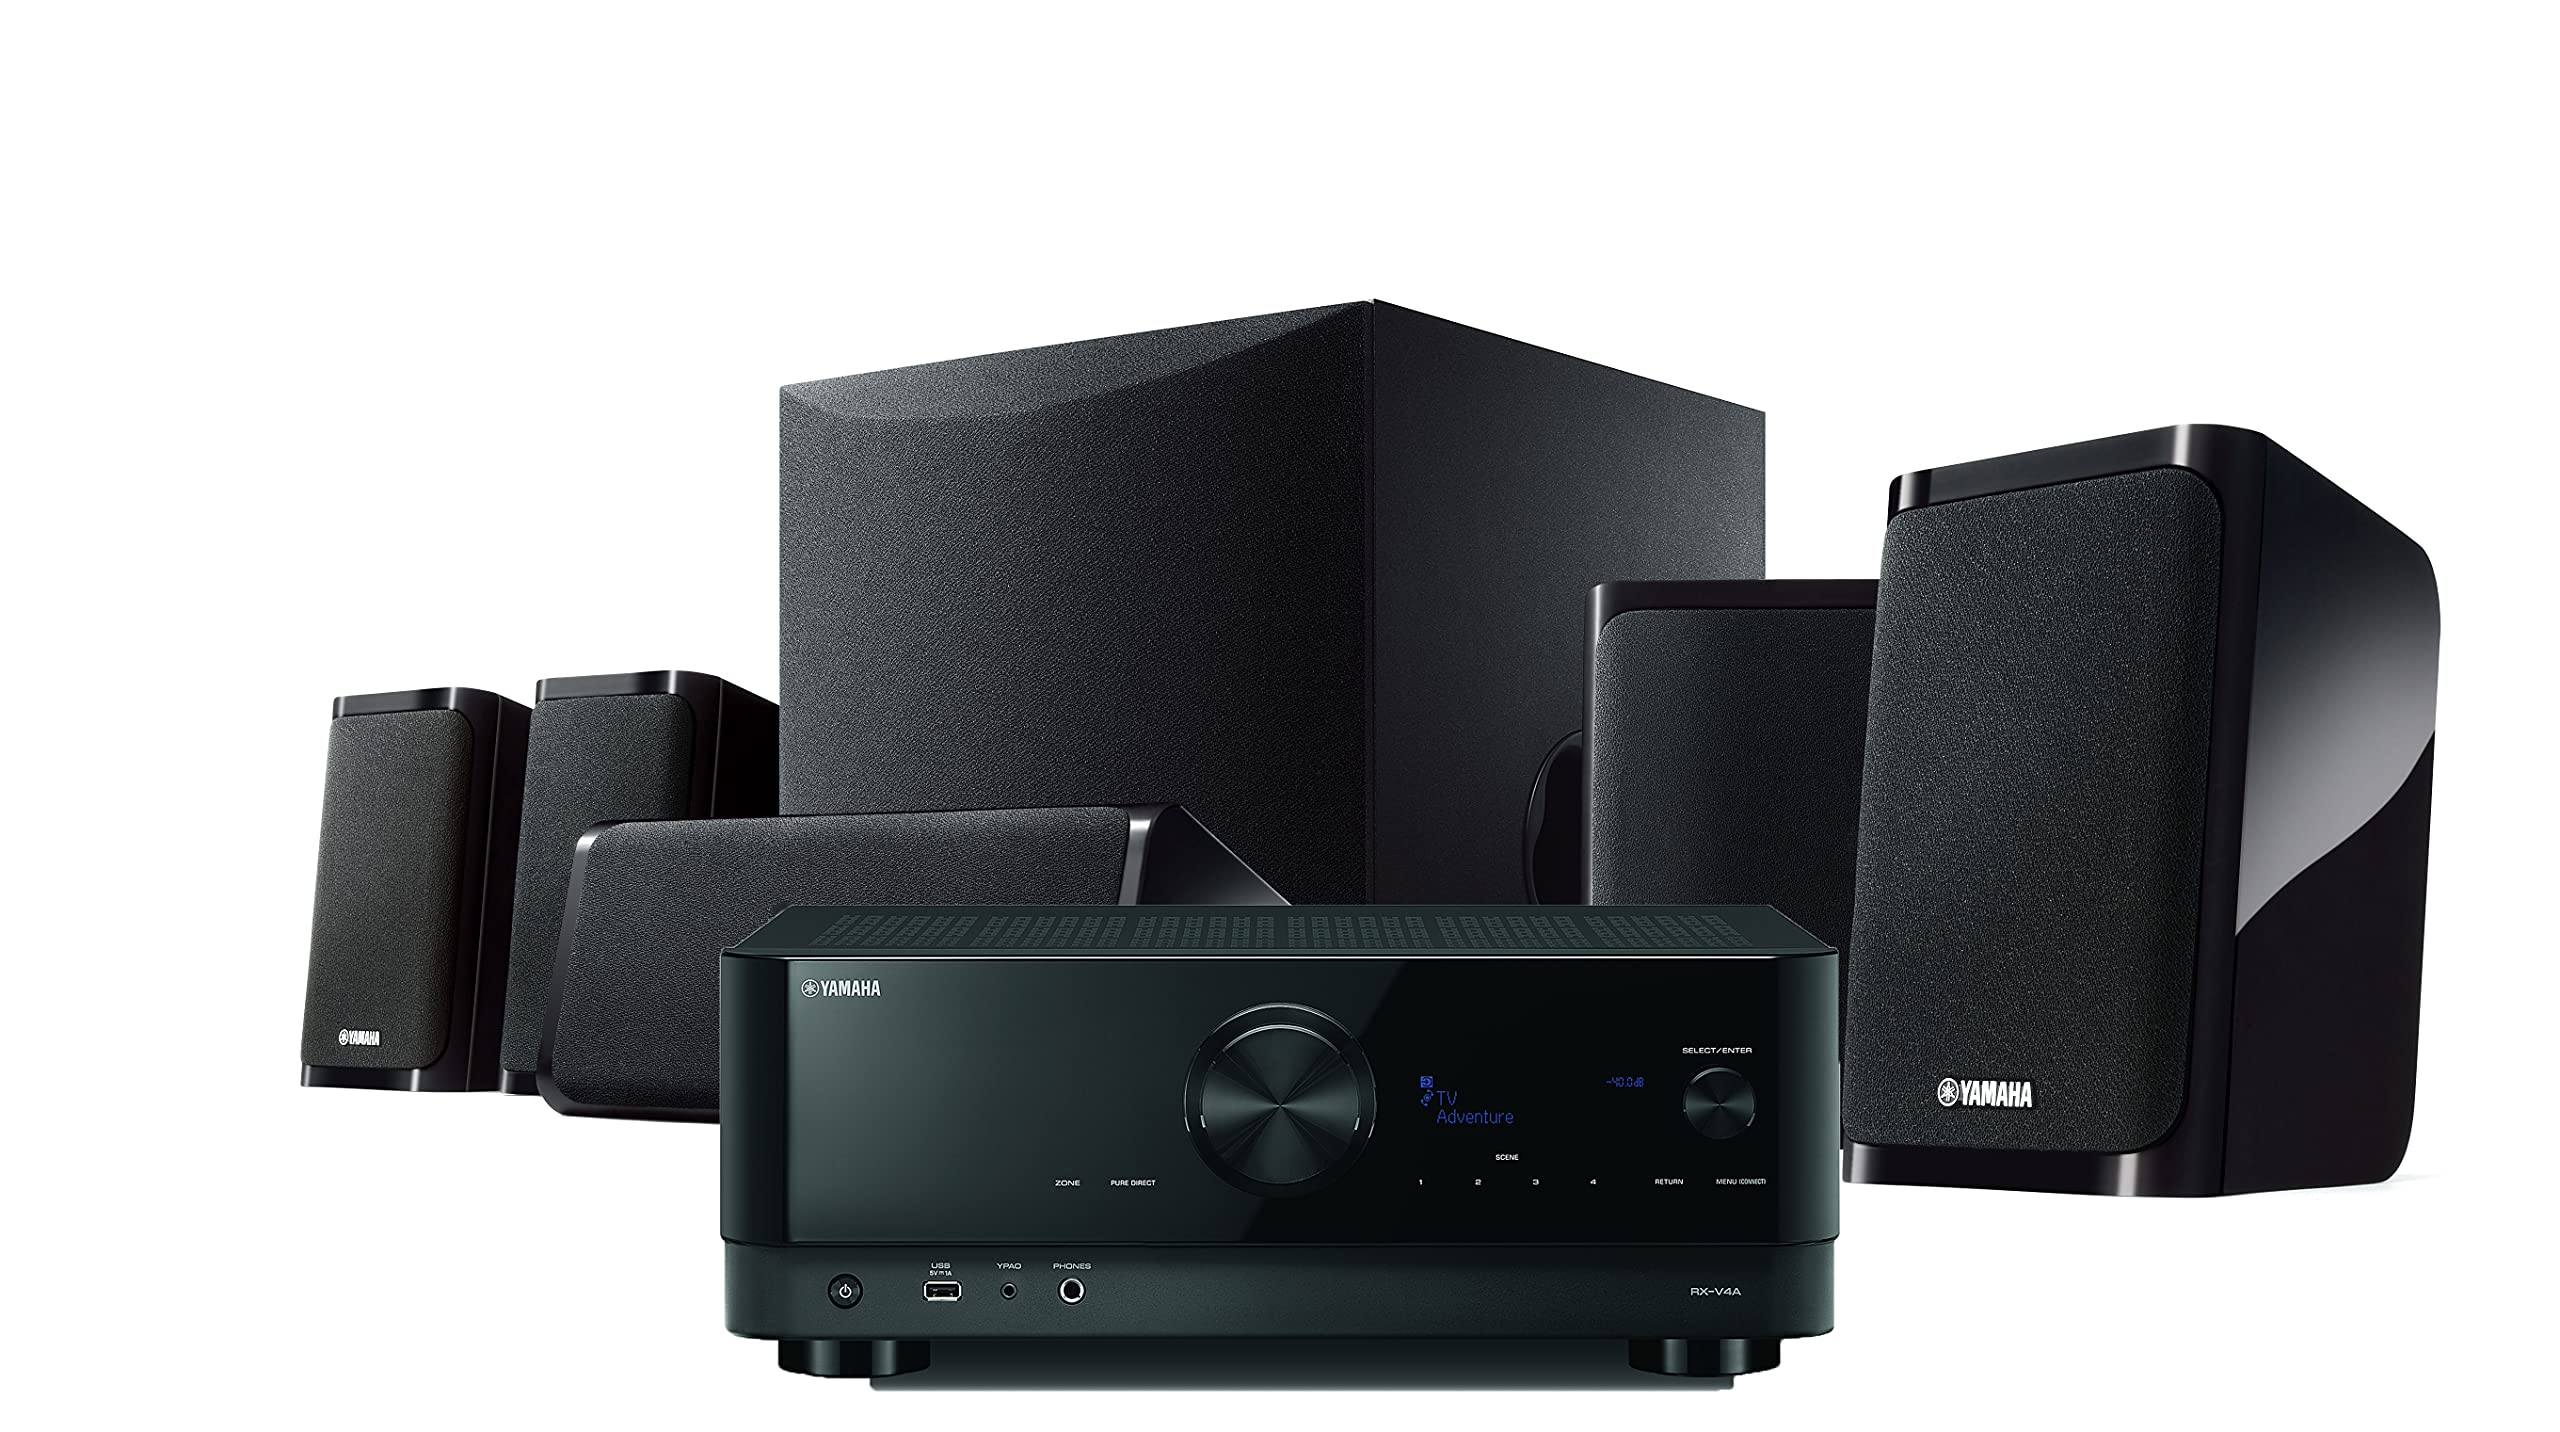 Yamaha Home Theater System w/ 8K HDMI & MusicCast (YHT-5960U) $530.30 + Free Shipping